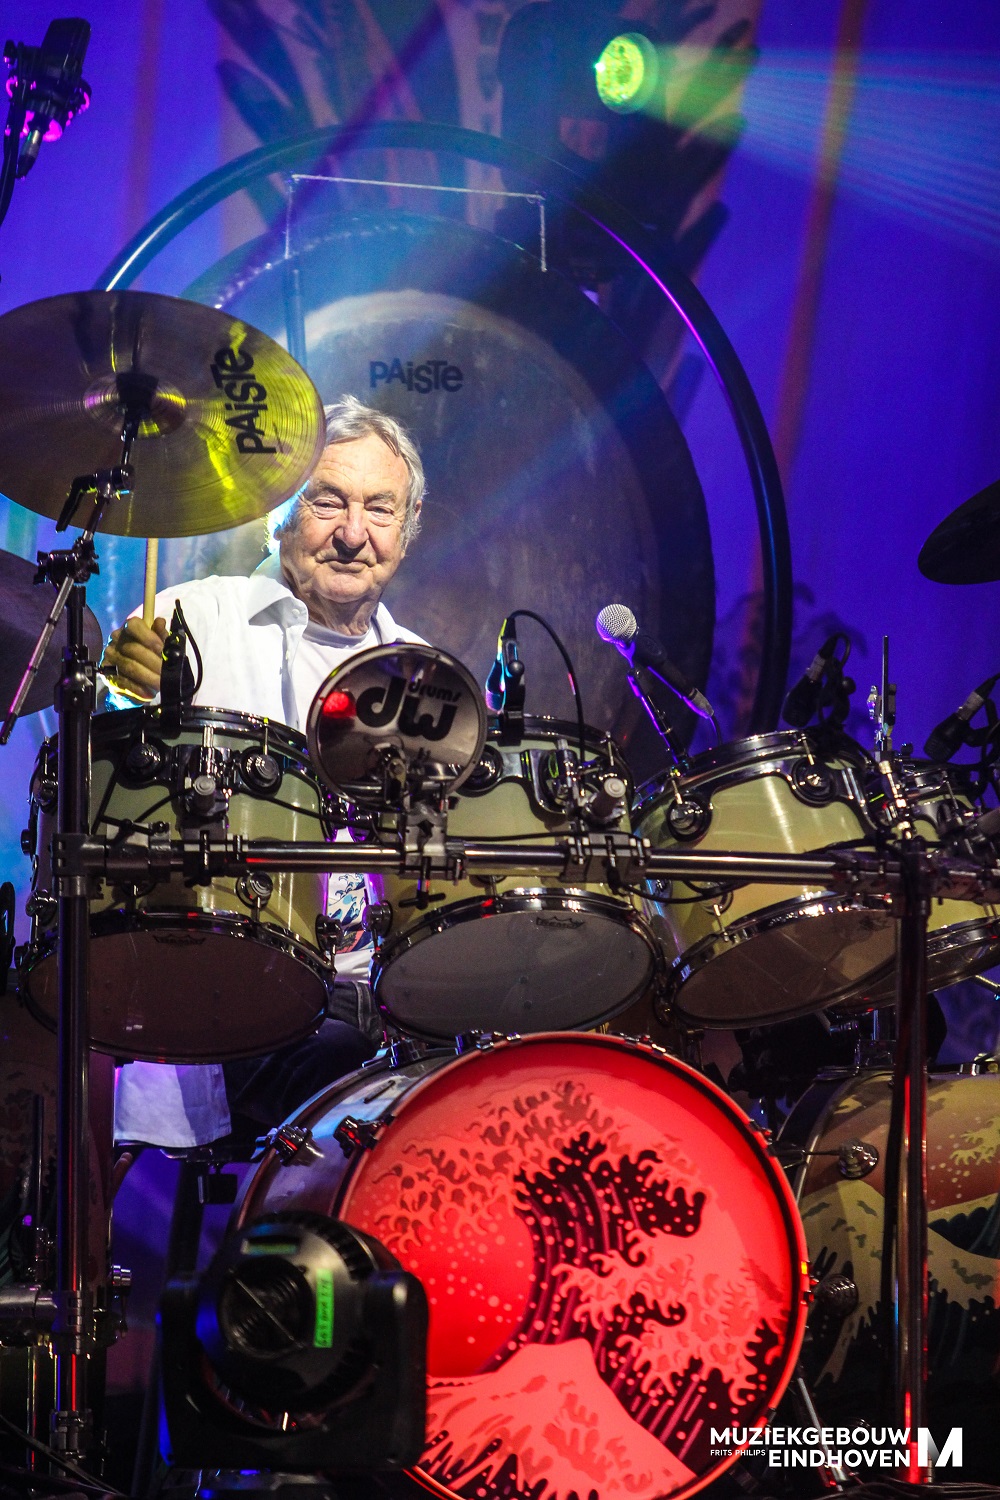 Nick Mason's Saucerful of Secrets - Playing the early years of Pink Floyd - Muziekgebouw Eindhoven